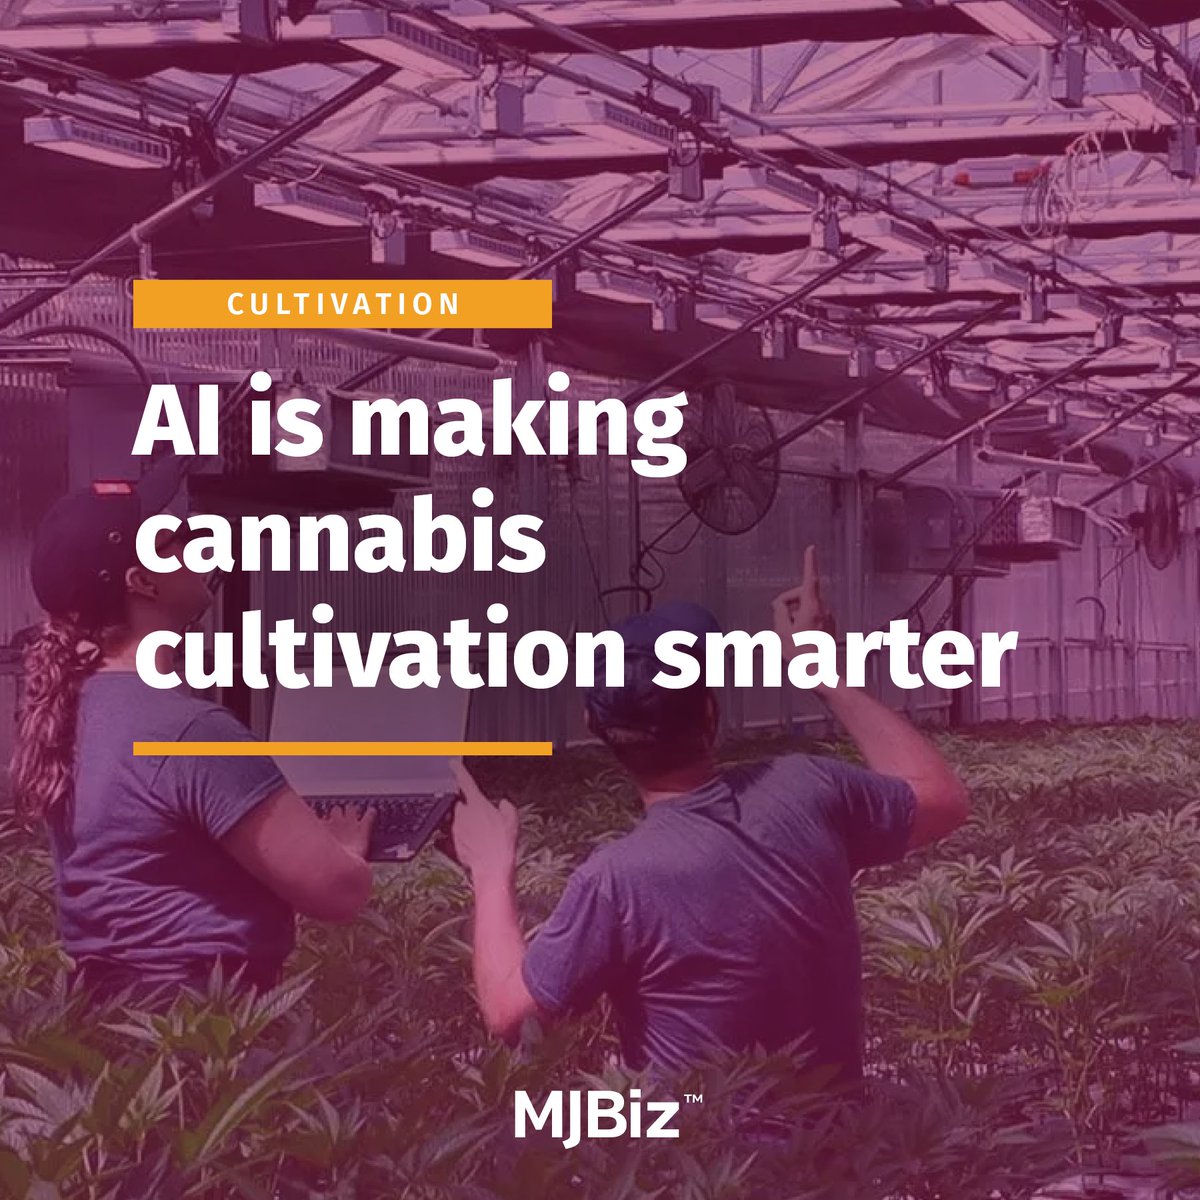 Machine learning is becoming increasingly common in indoor #cannabis grows, as cultivators use sophisticated sensors and cameras to maintain optimal growing conditions, sound the alarm about threats such as pests or disease and reduce labor costs associated with both menial and